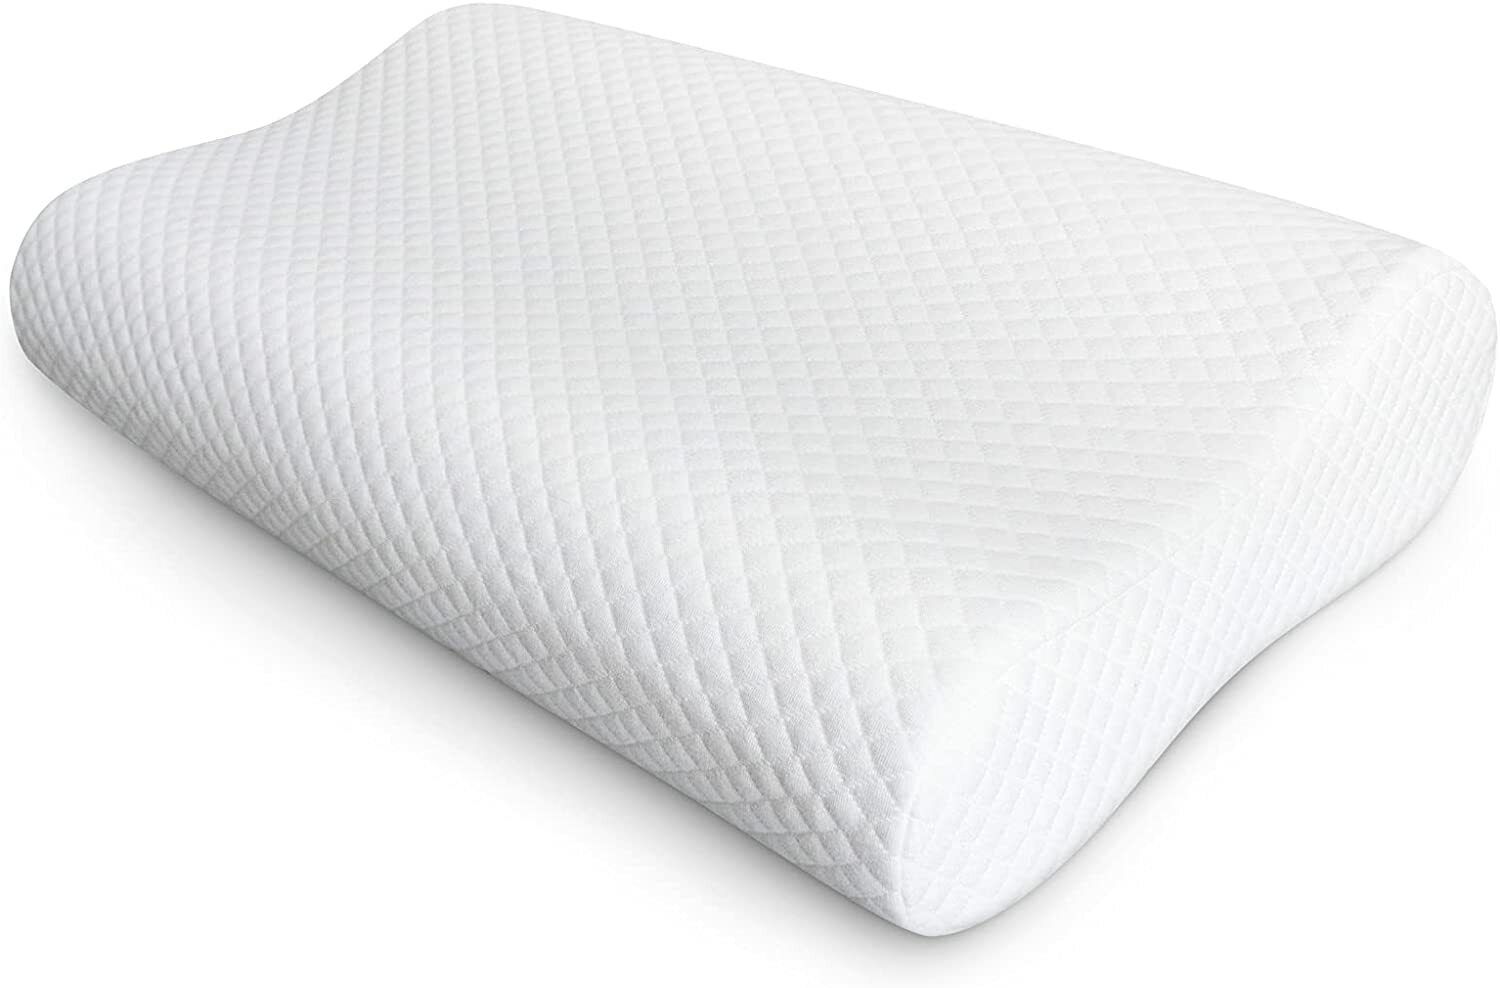 Memory Foam, 3 Layer Adjustable Contour Pillows, Cervical Orthopedic Pillow White